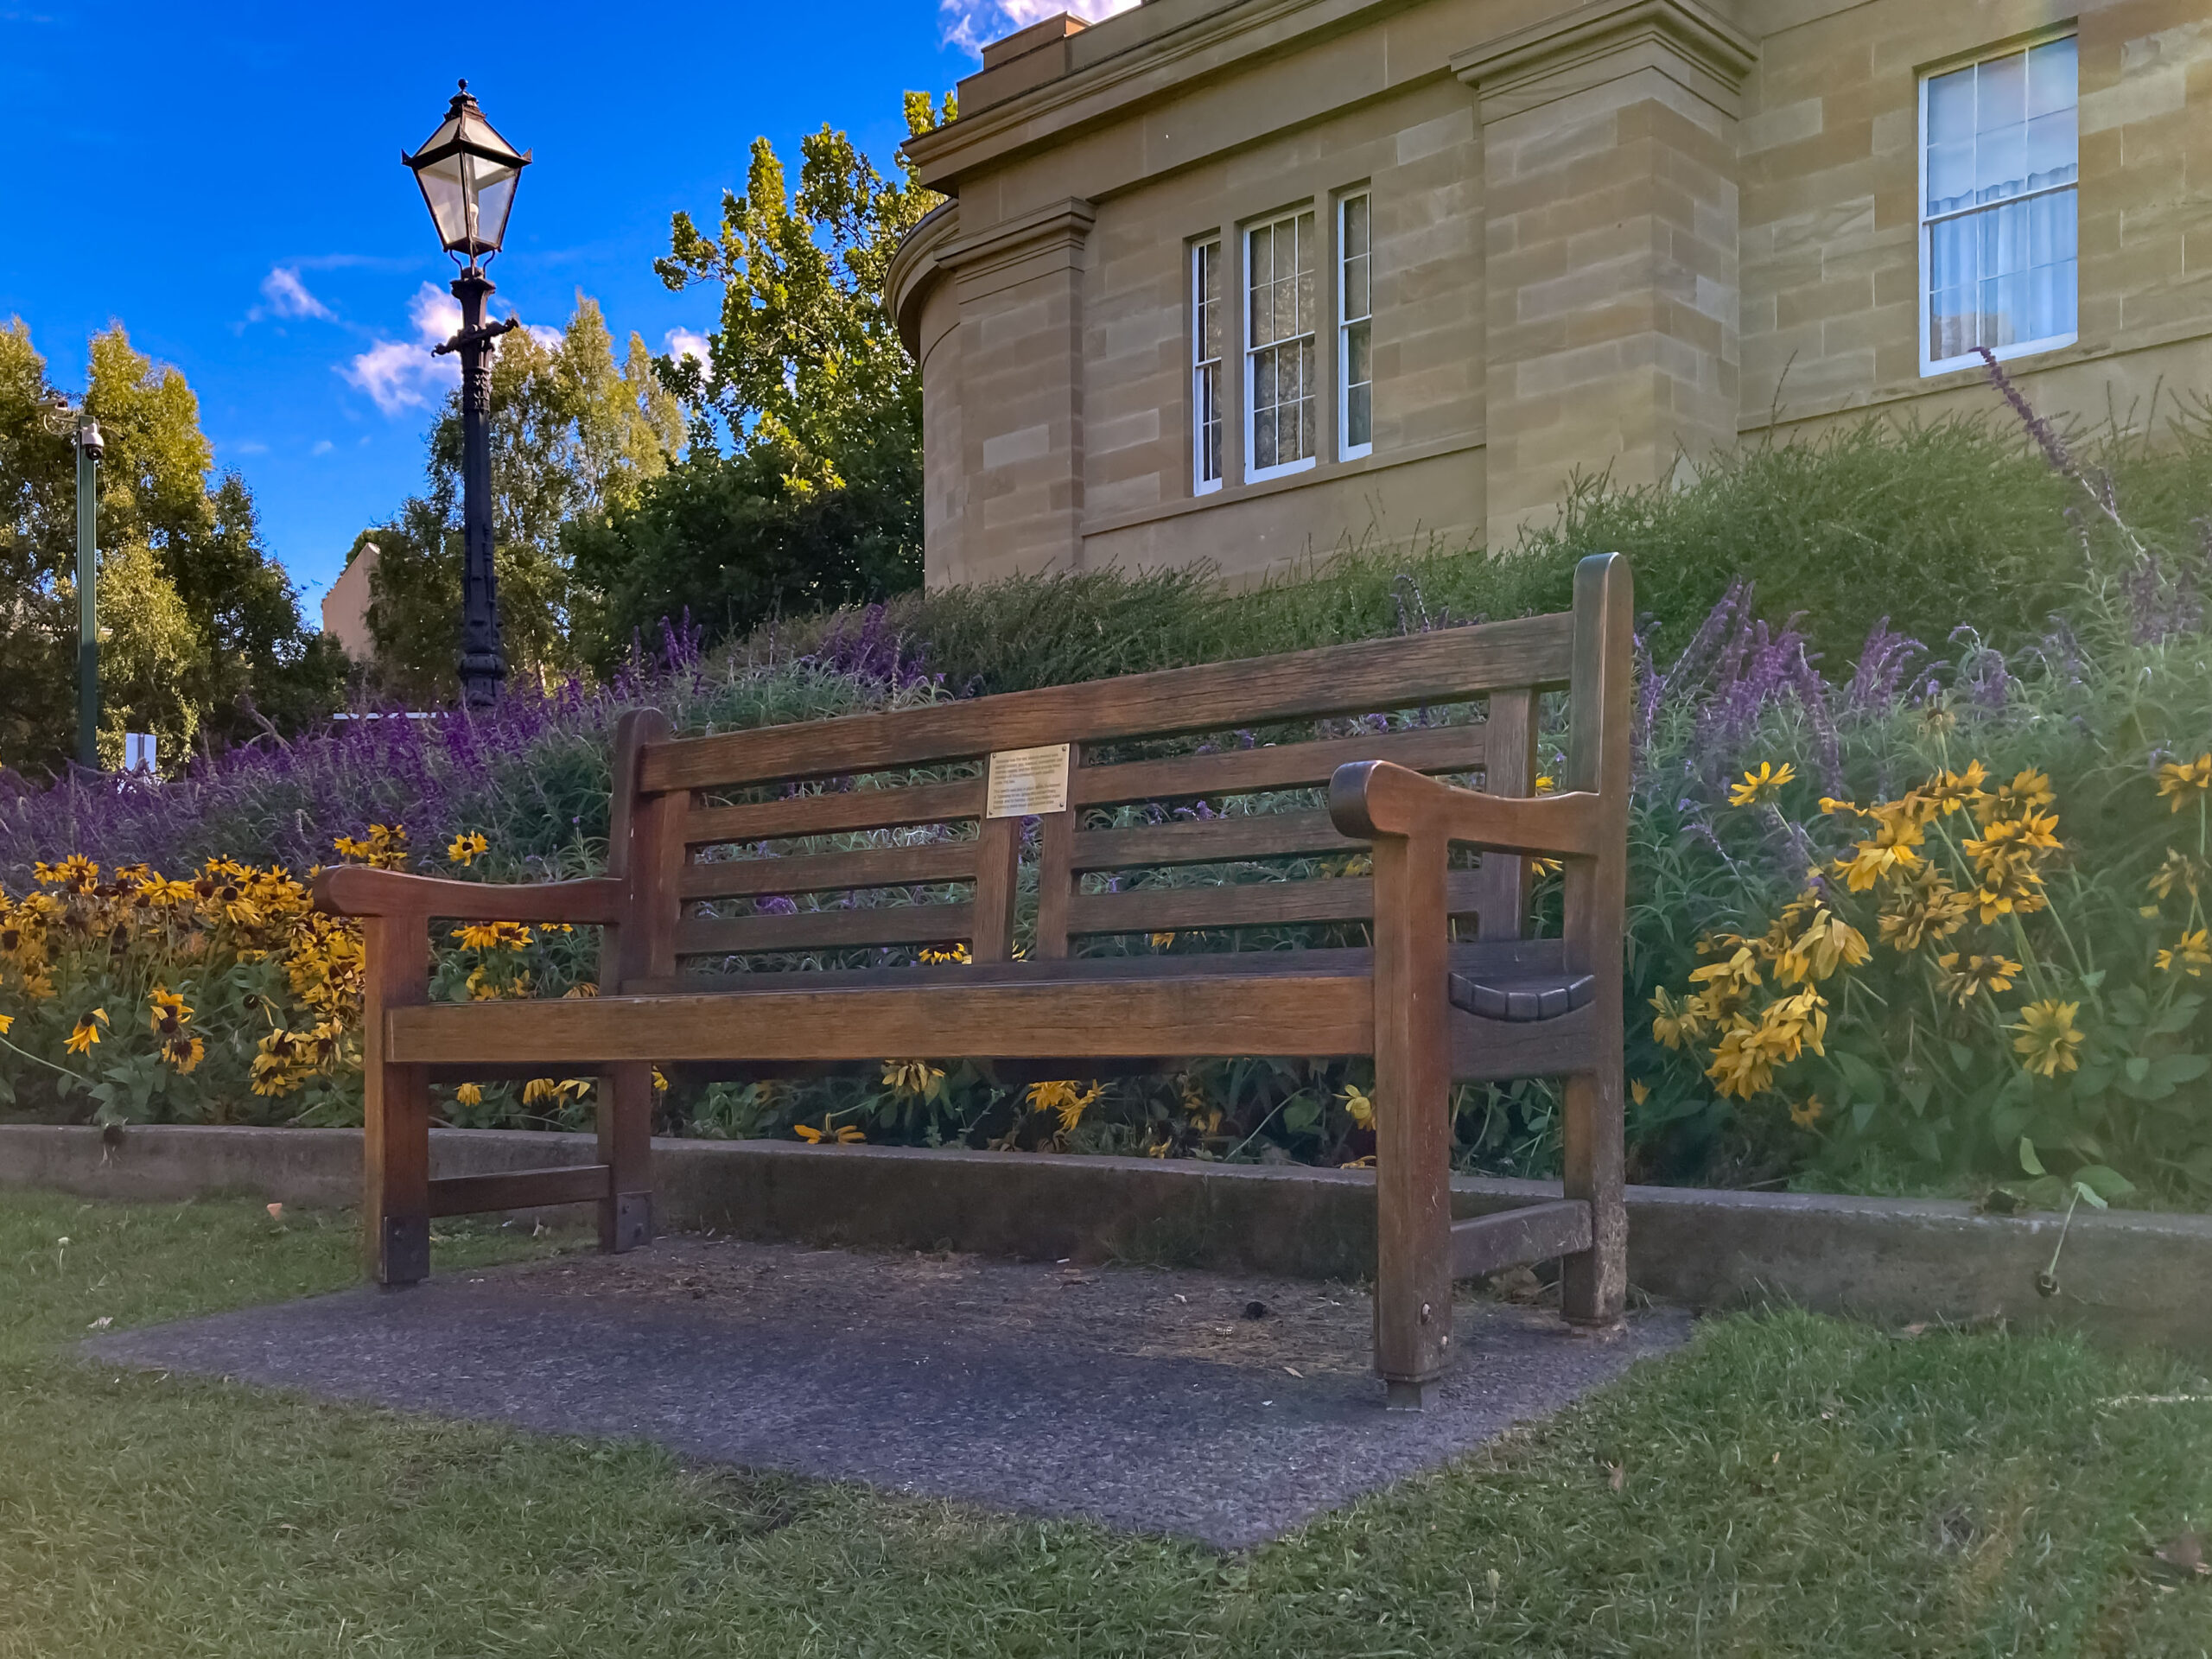 A wooden park bench in a garden outside of an old sandstone building